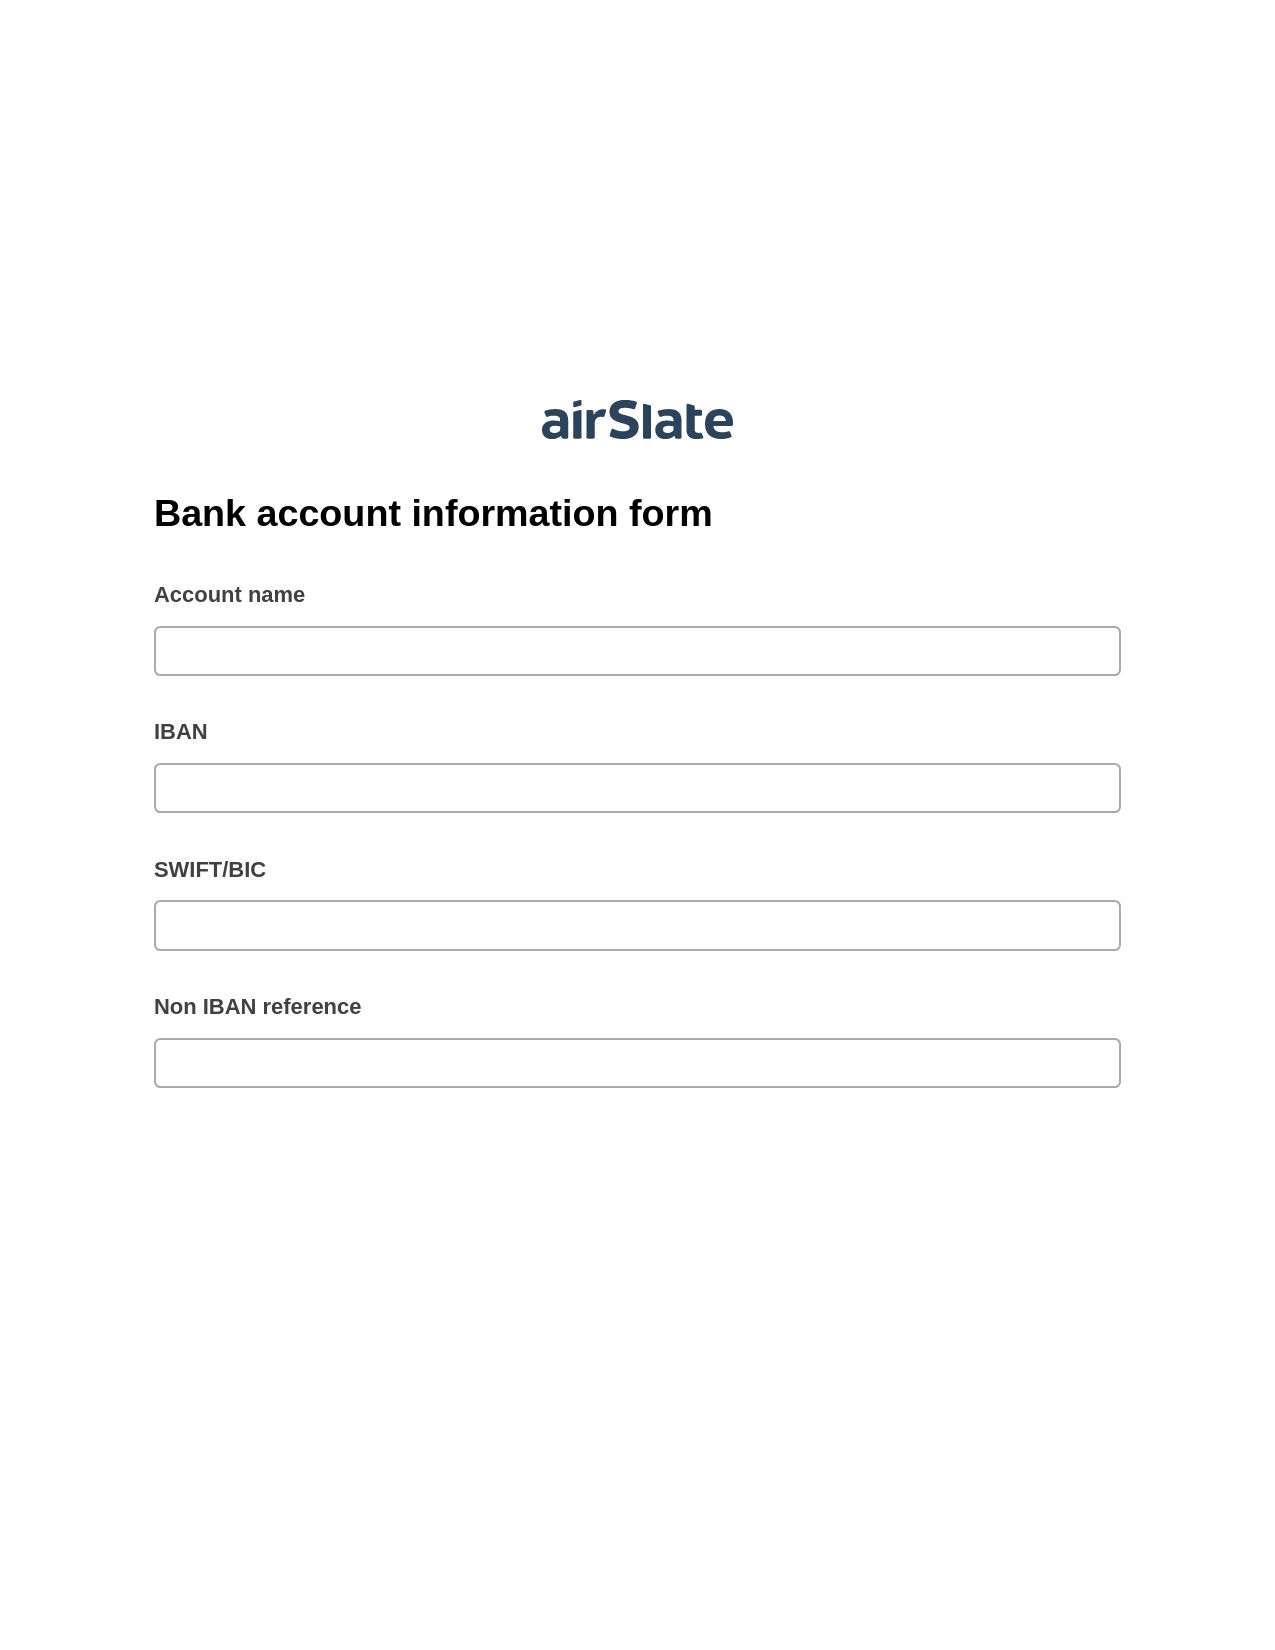 Multirole Bank account information form Pre-fill Slate from MS Dynamics 365 Records Bot, Remove Tags From Slate Bot, Archive to SharePoint Folder Bot